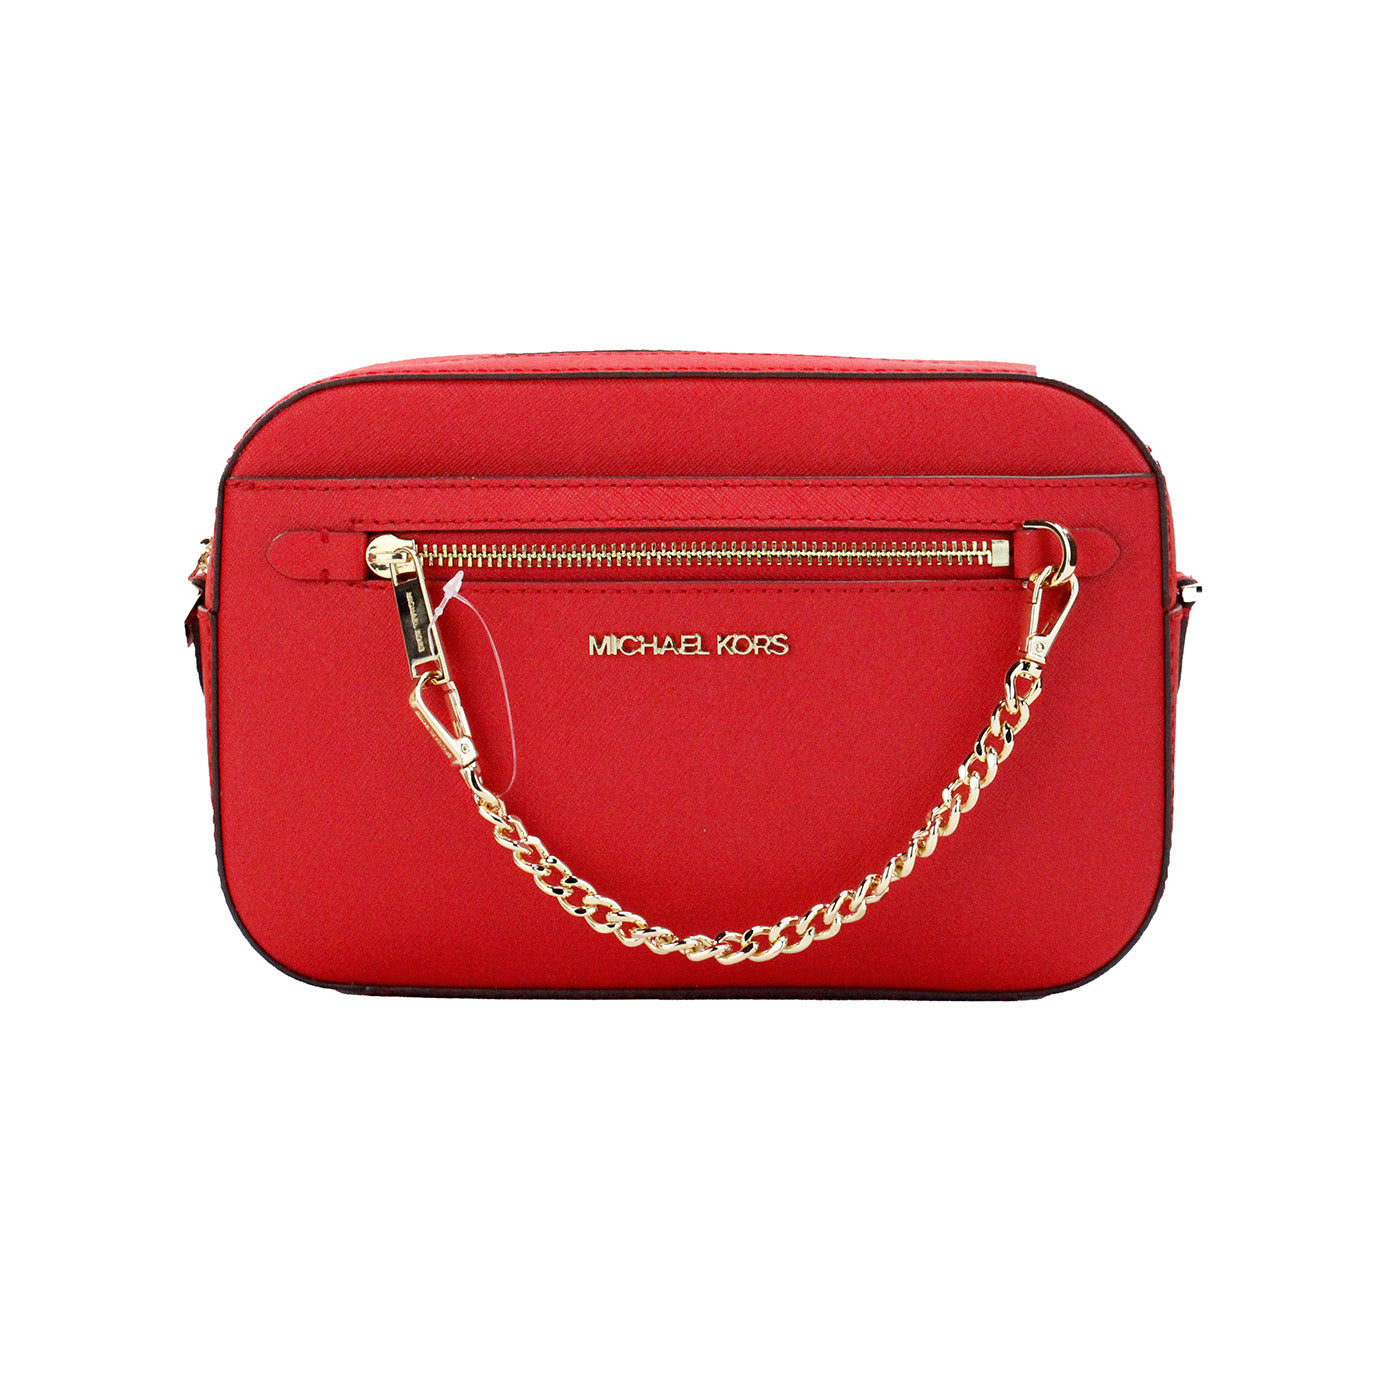 Jet Set Large East West Bright Red Leather Zip Chain Crossbody Bag